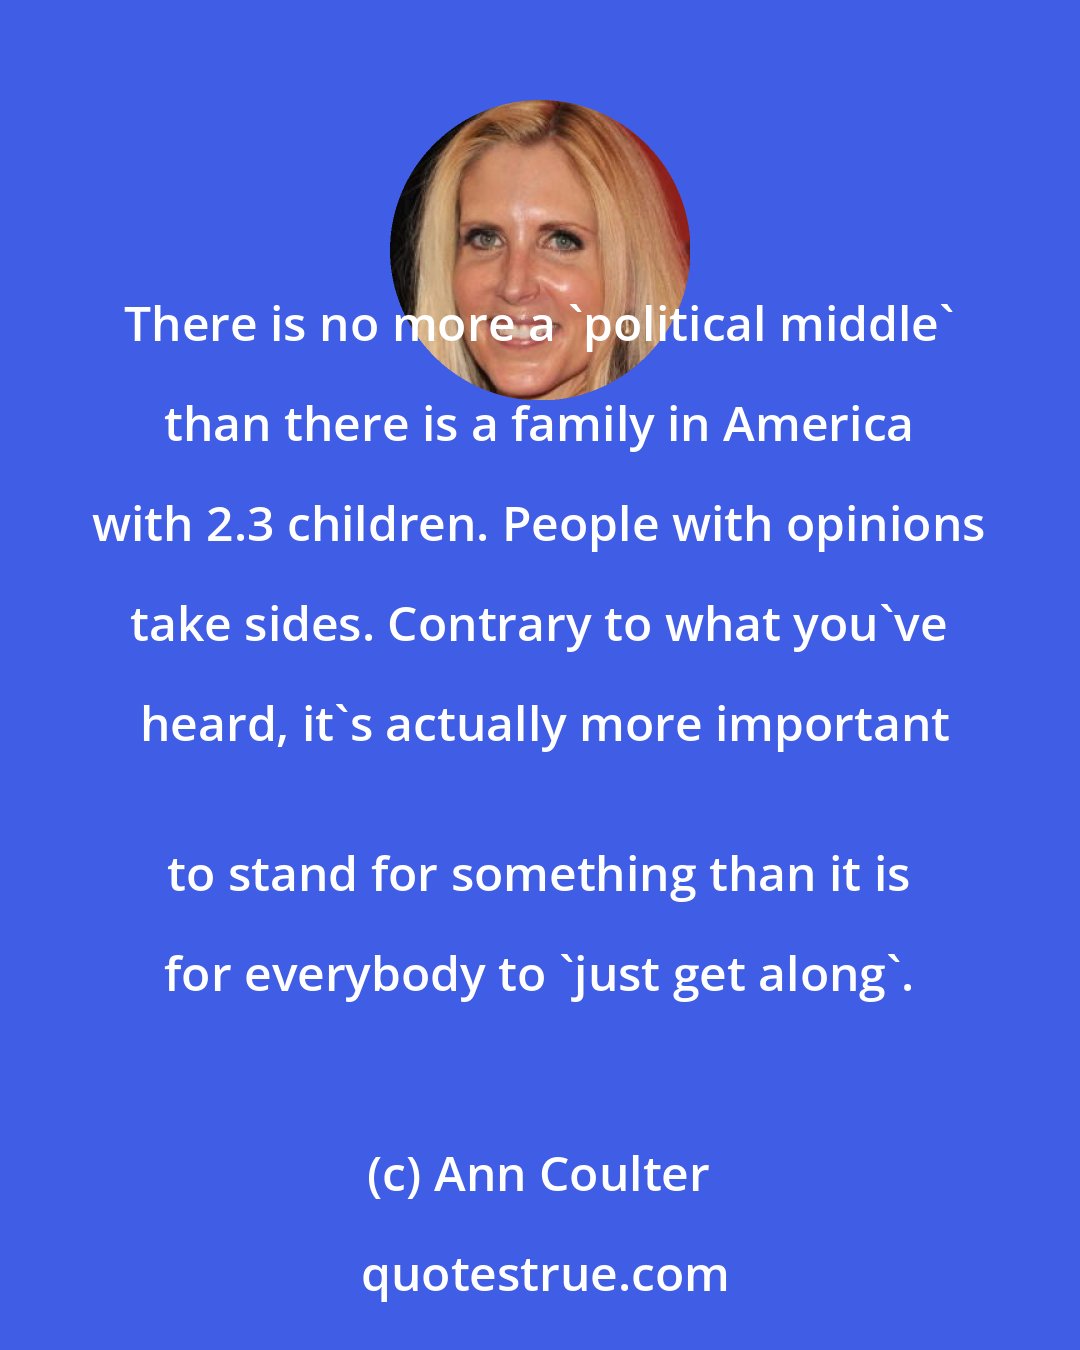 Ann Coulter: There is no more a 'political middle' than there is a family in America with 2.3 children. People with opinions take sides. Contrary to what you've heard, it's actually more important
 to stand for something than it is for everybody to 'just get along'.